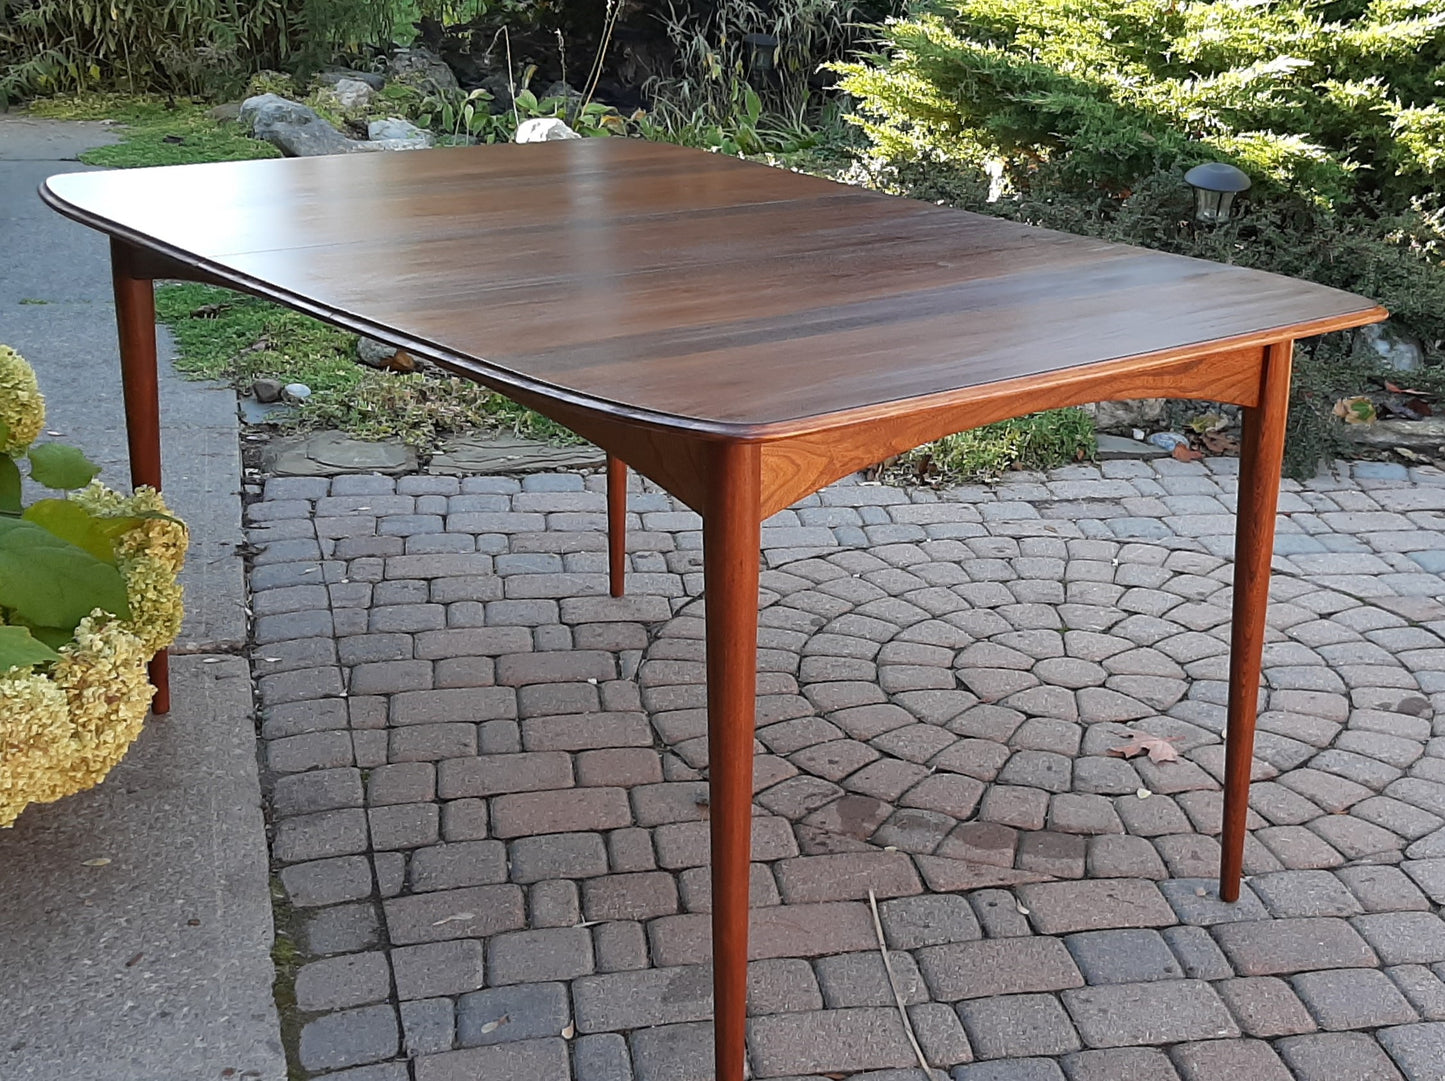 REFINISHED MCM Walnut Dining Table Extendable w 2 leaves by Deilcraft, perfect, 4-6 ft